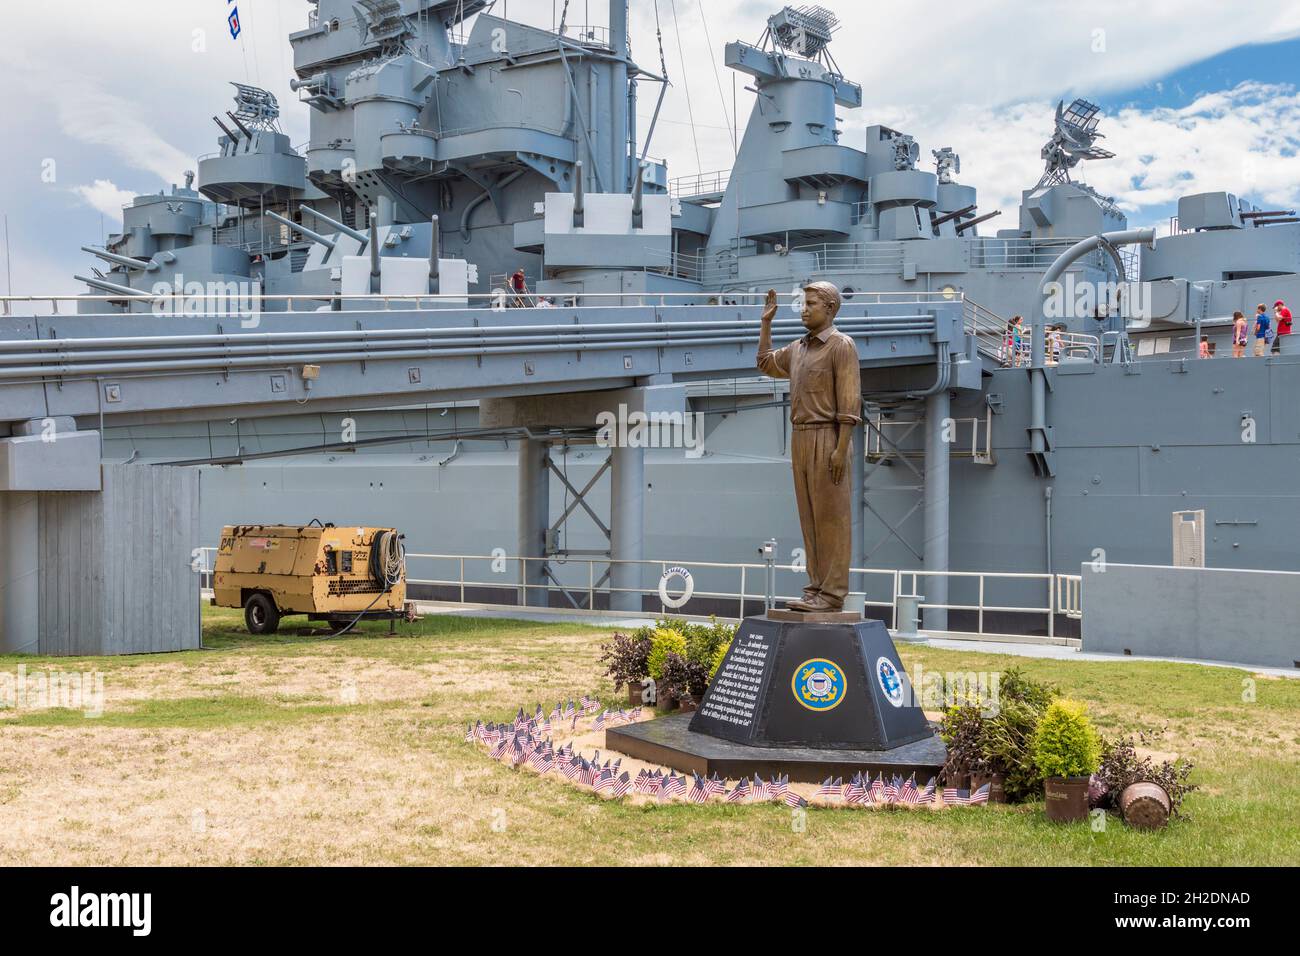 The Oath statue tribute to the US Coast Guard at the Battleship Memorial Park in Mobile, Alabama Stock Photo